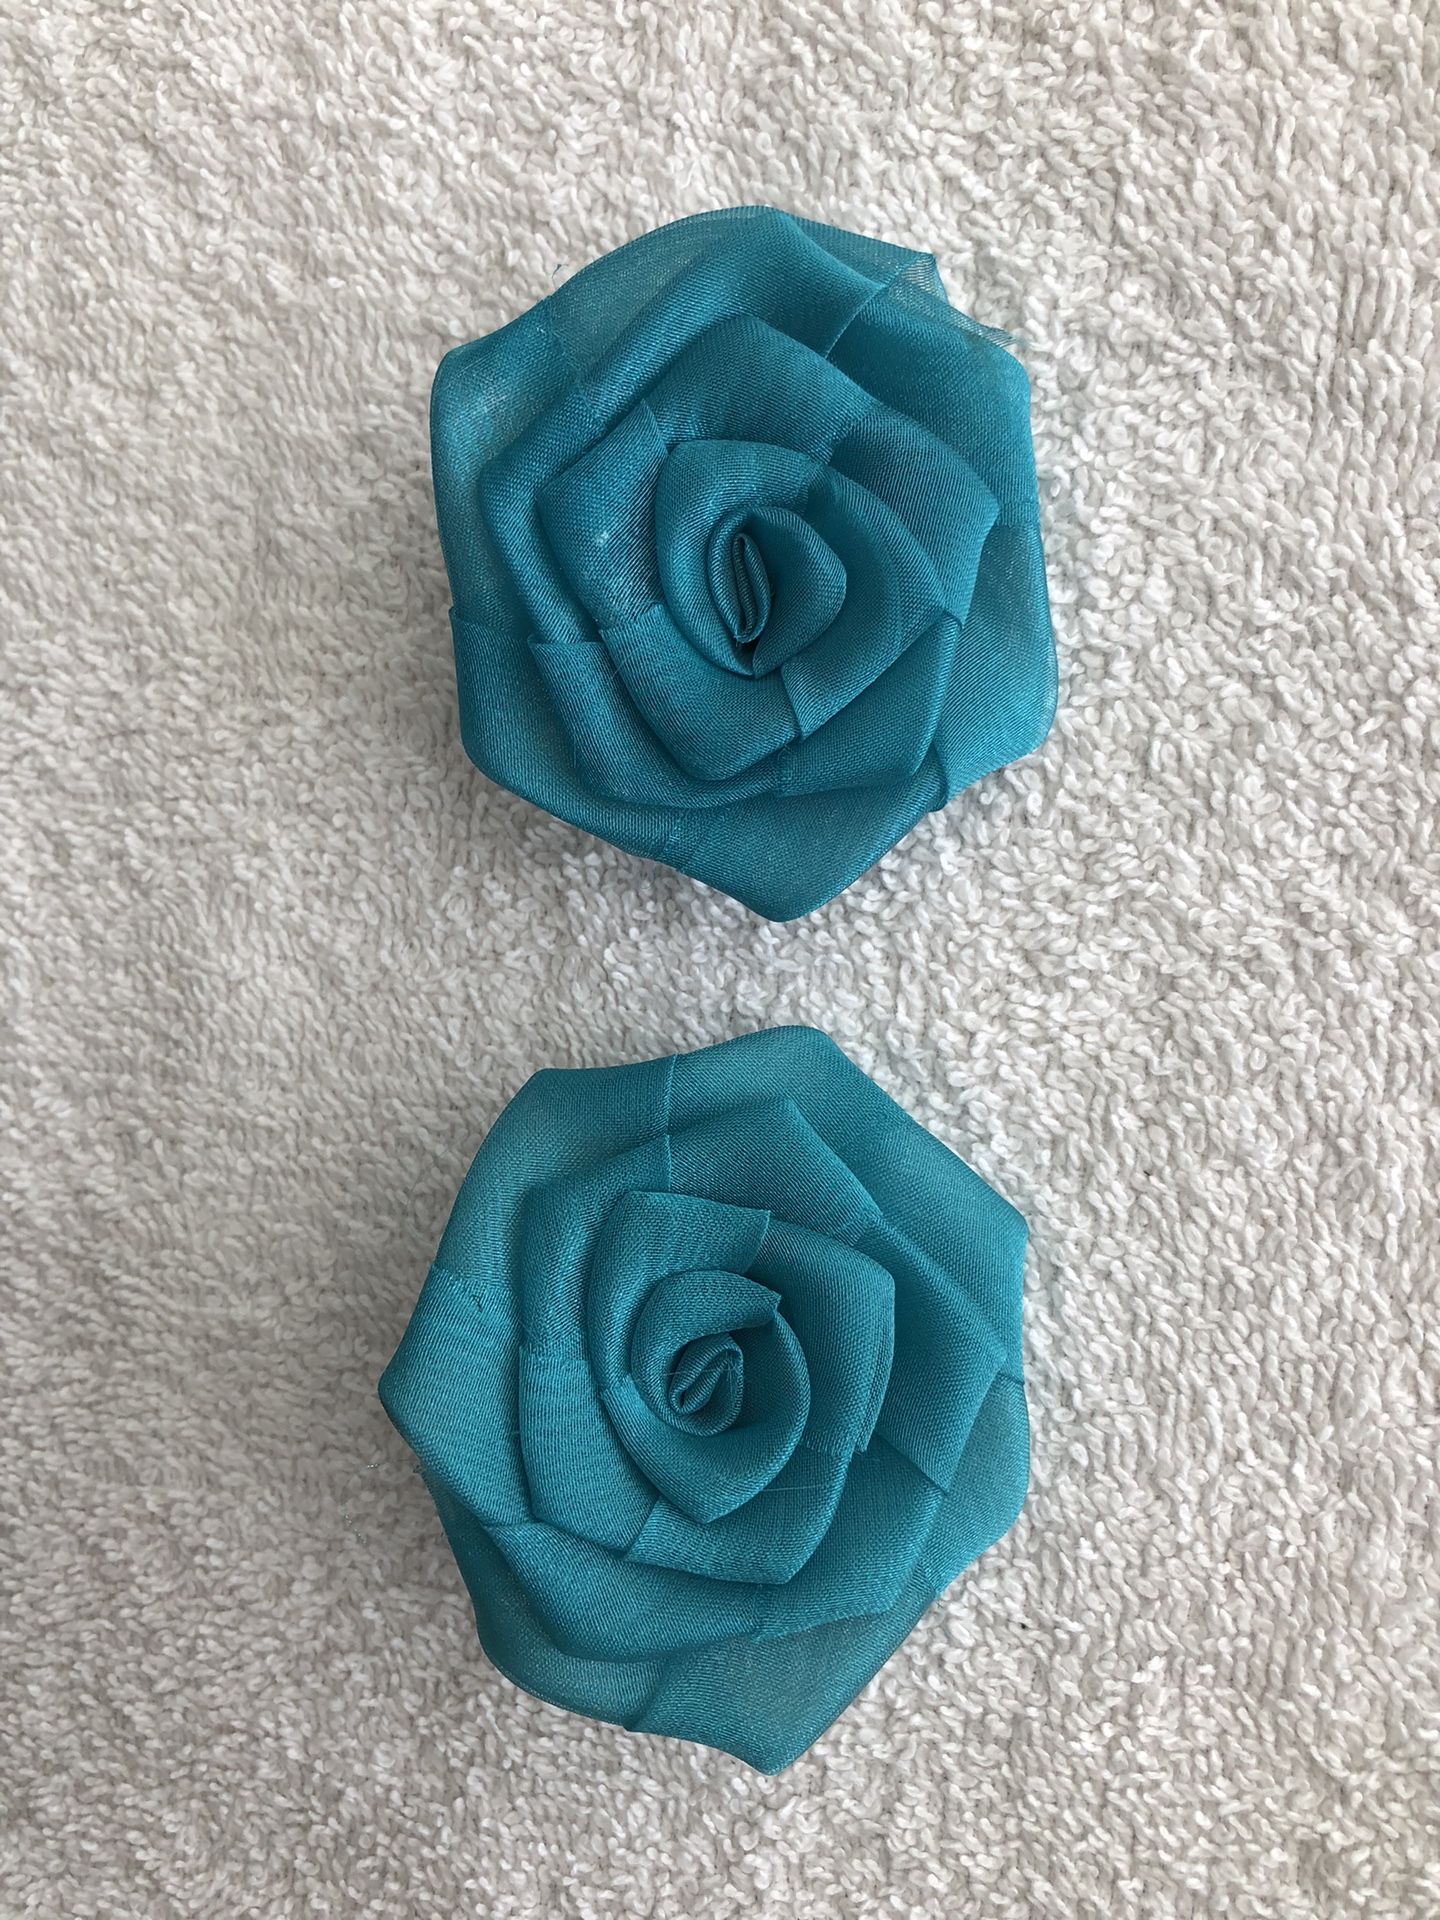 2 Turquoise Fabric Rose Pins